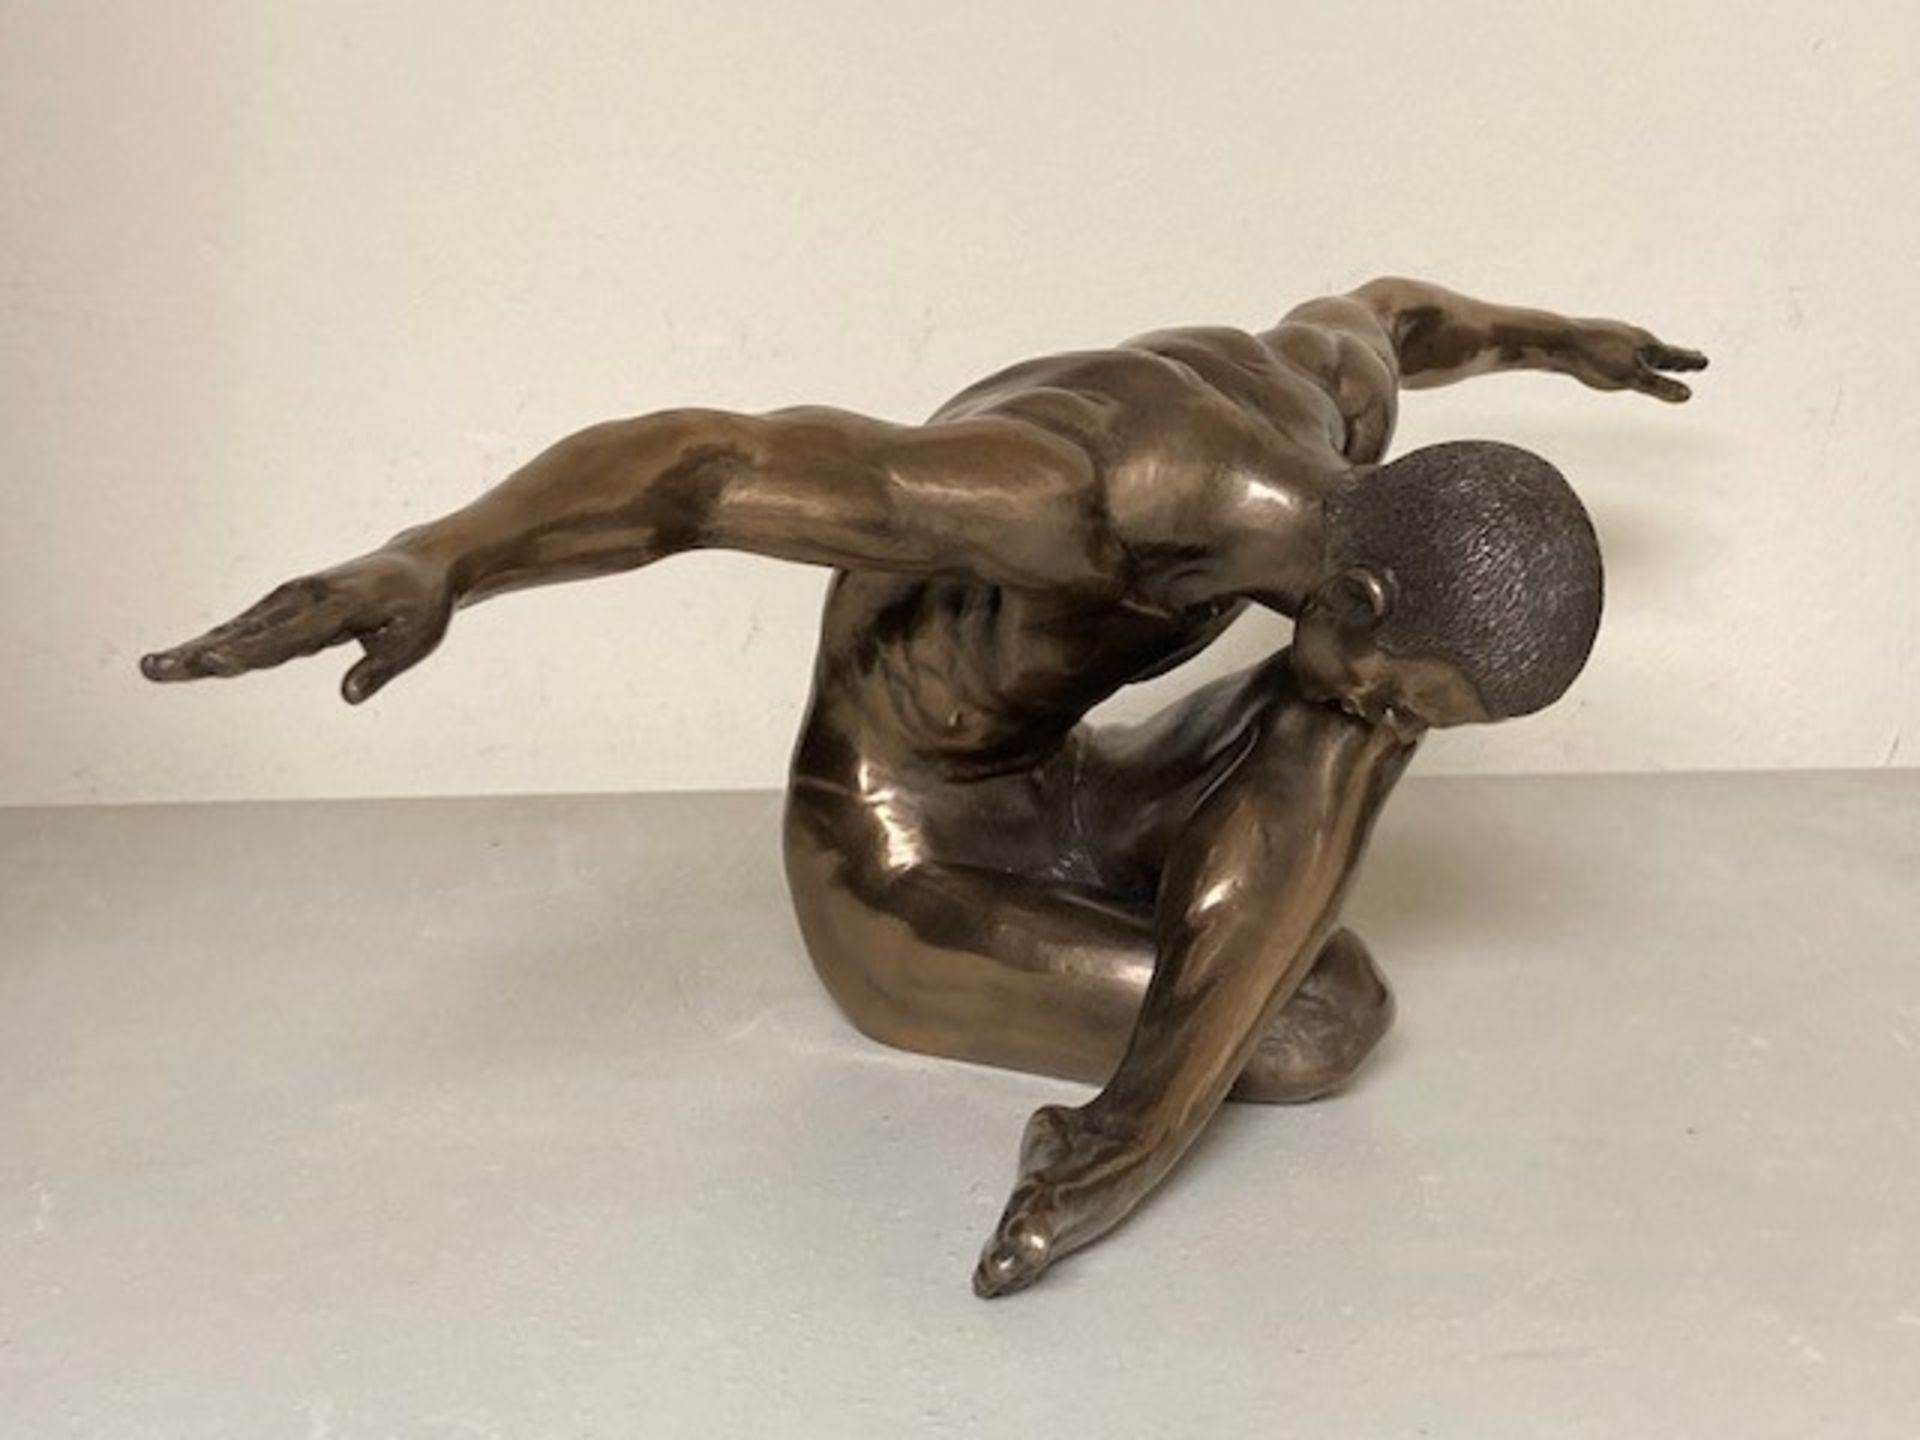 A Harmony nude male bronze effect figure with outstretched arms model WU75155 Verunese design, - Image 3 of 3